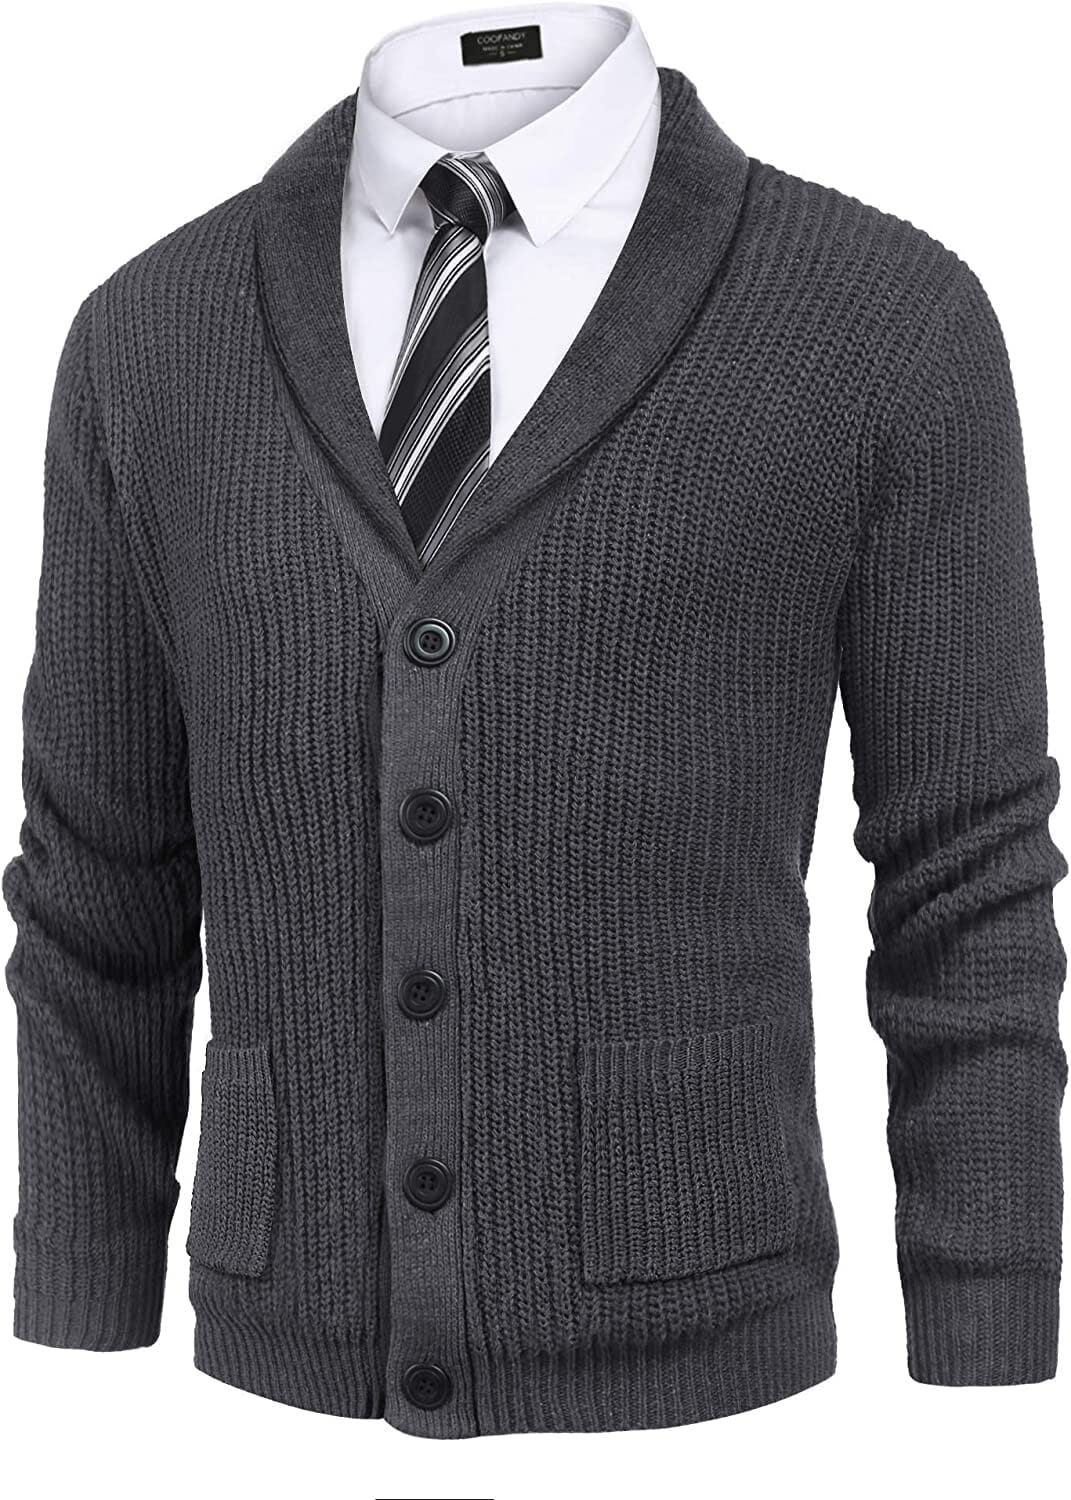 Lapel Button Up Cable Knit Cardigan with Pockets (US Only) Cardigans COOFANDY Store Dark Grey S 